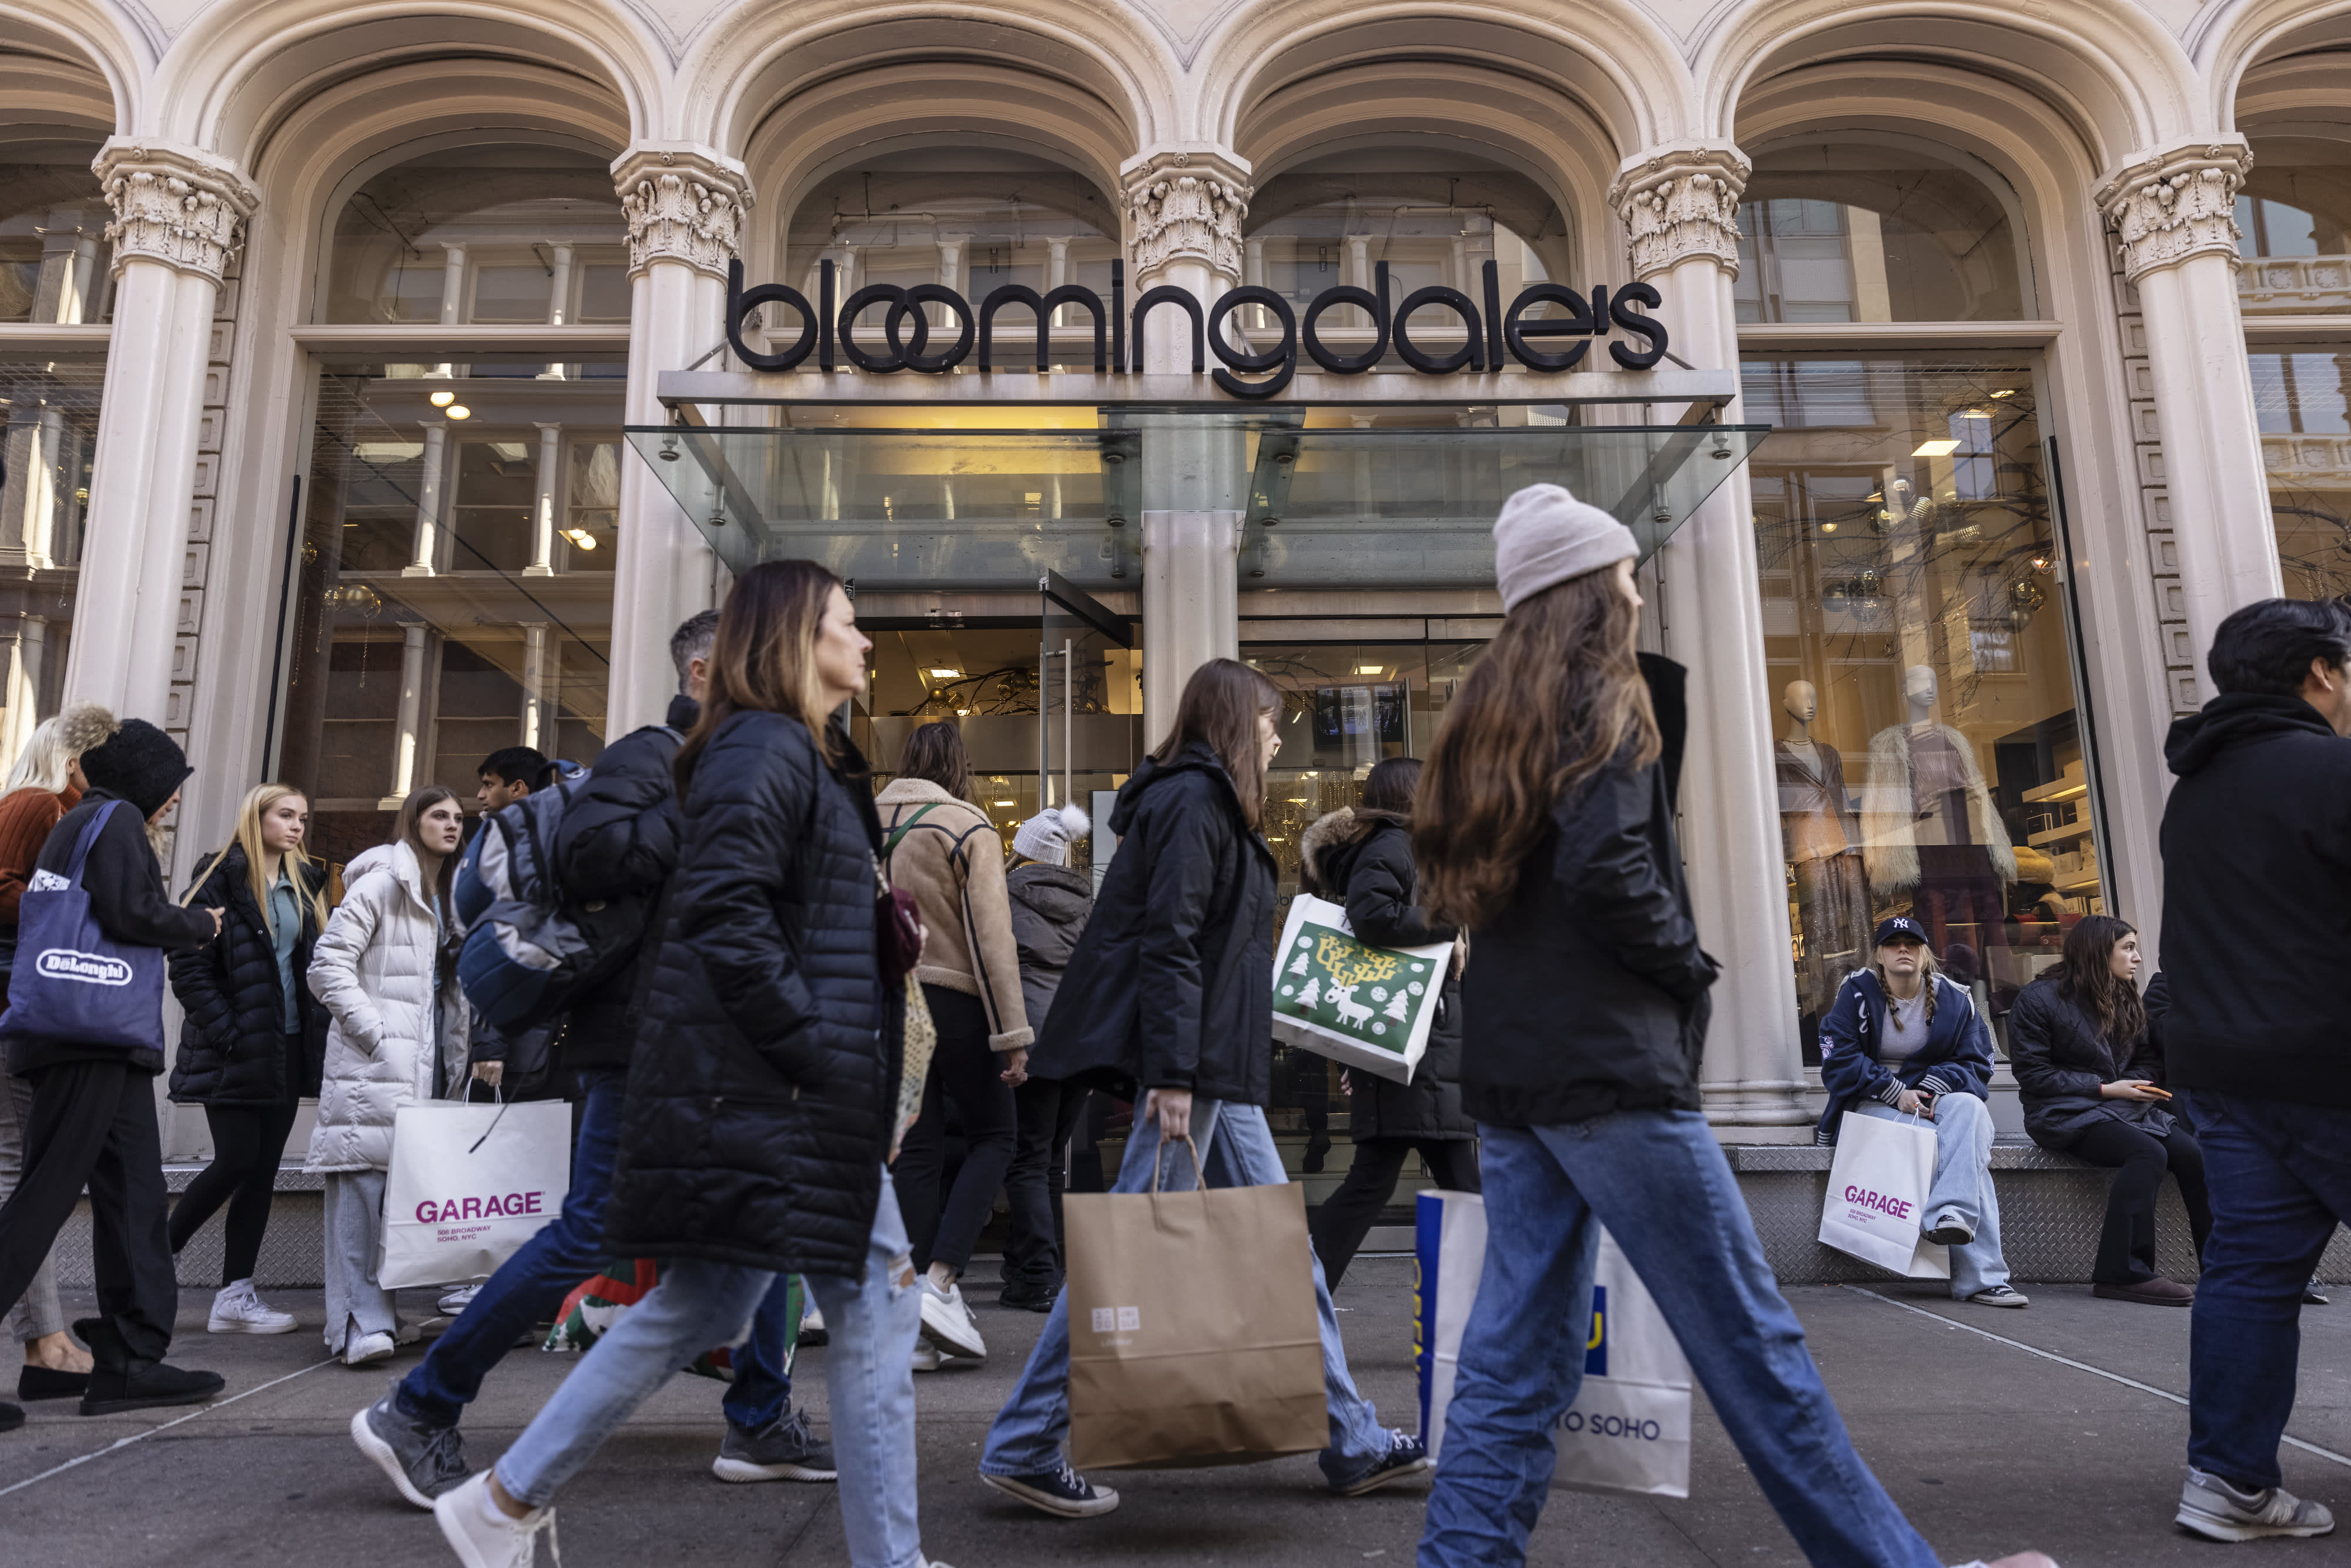 Macy's appoints new Bloomingdale's CEO